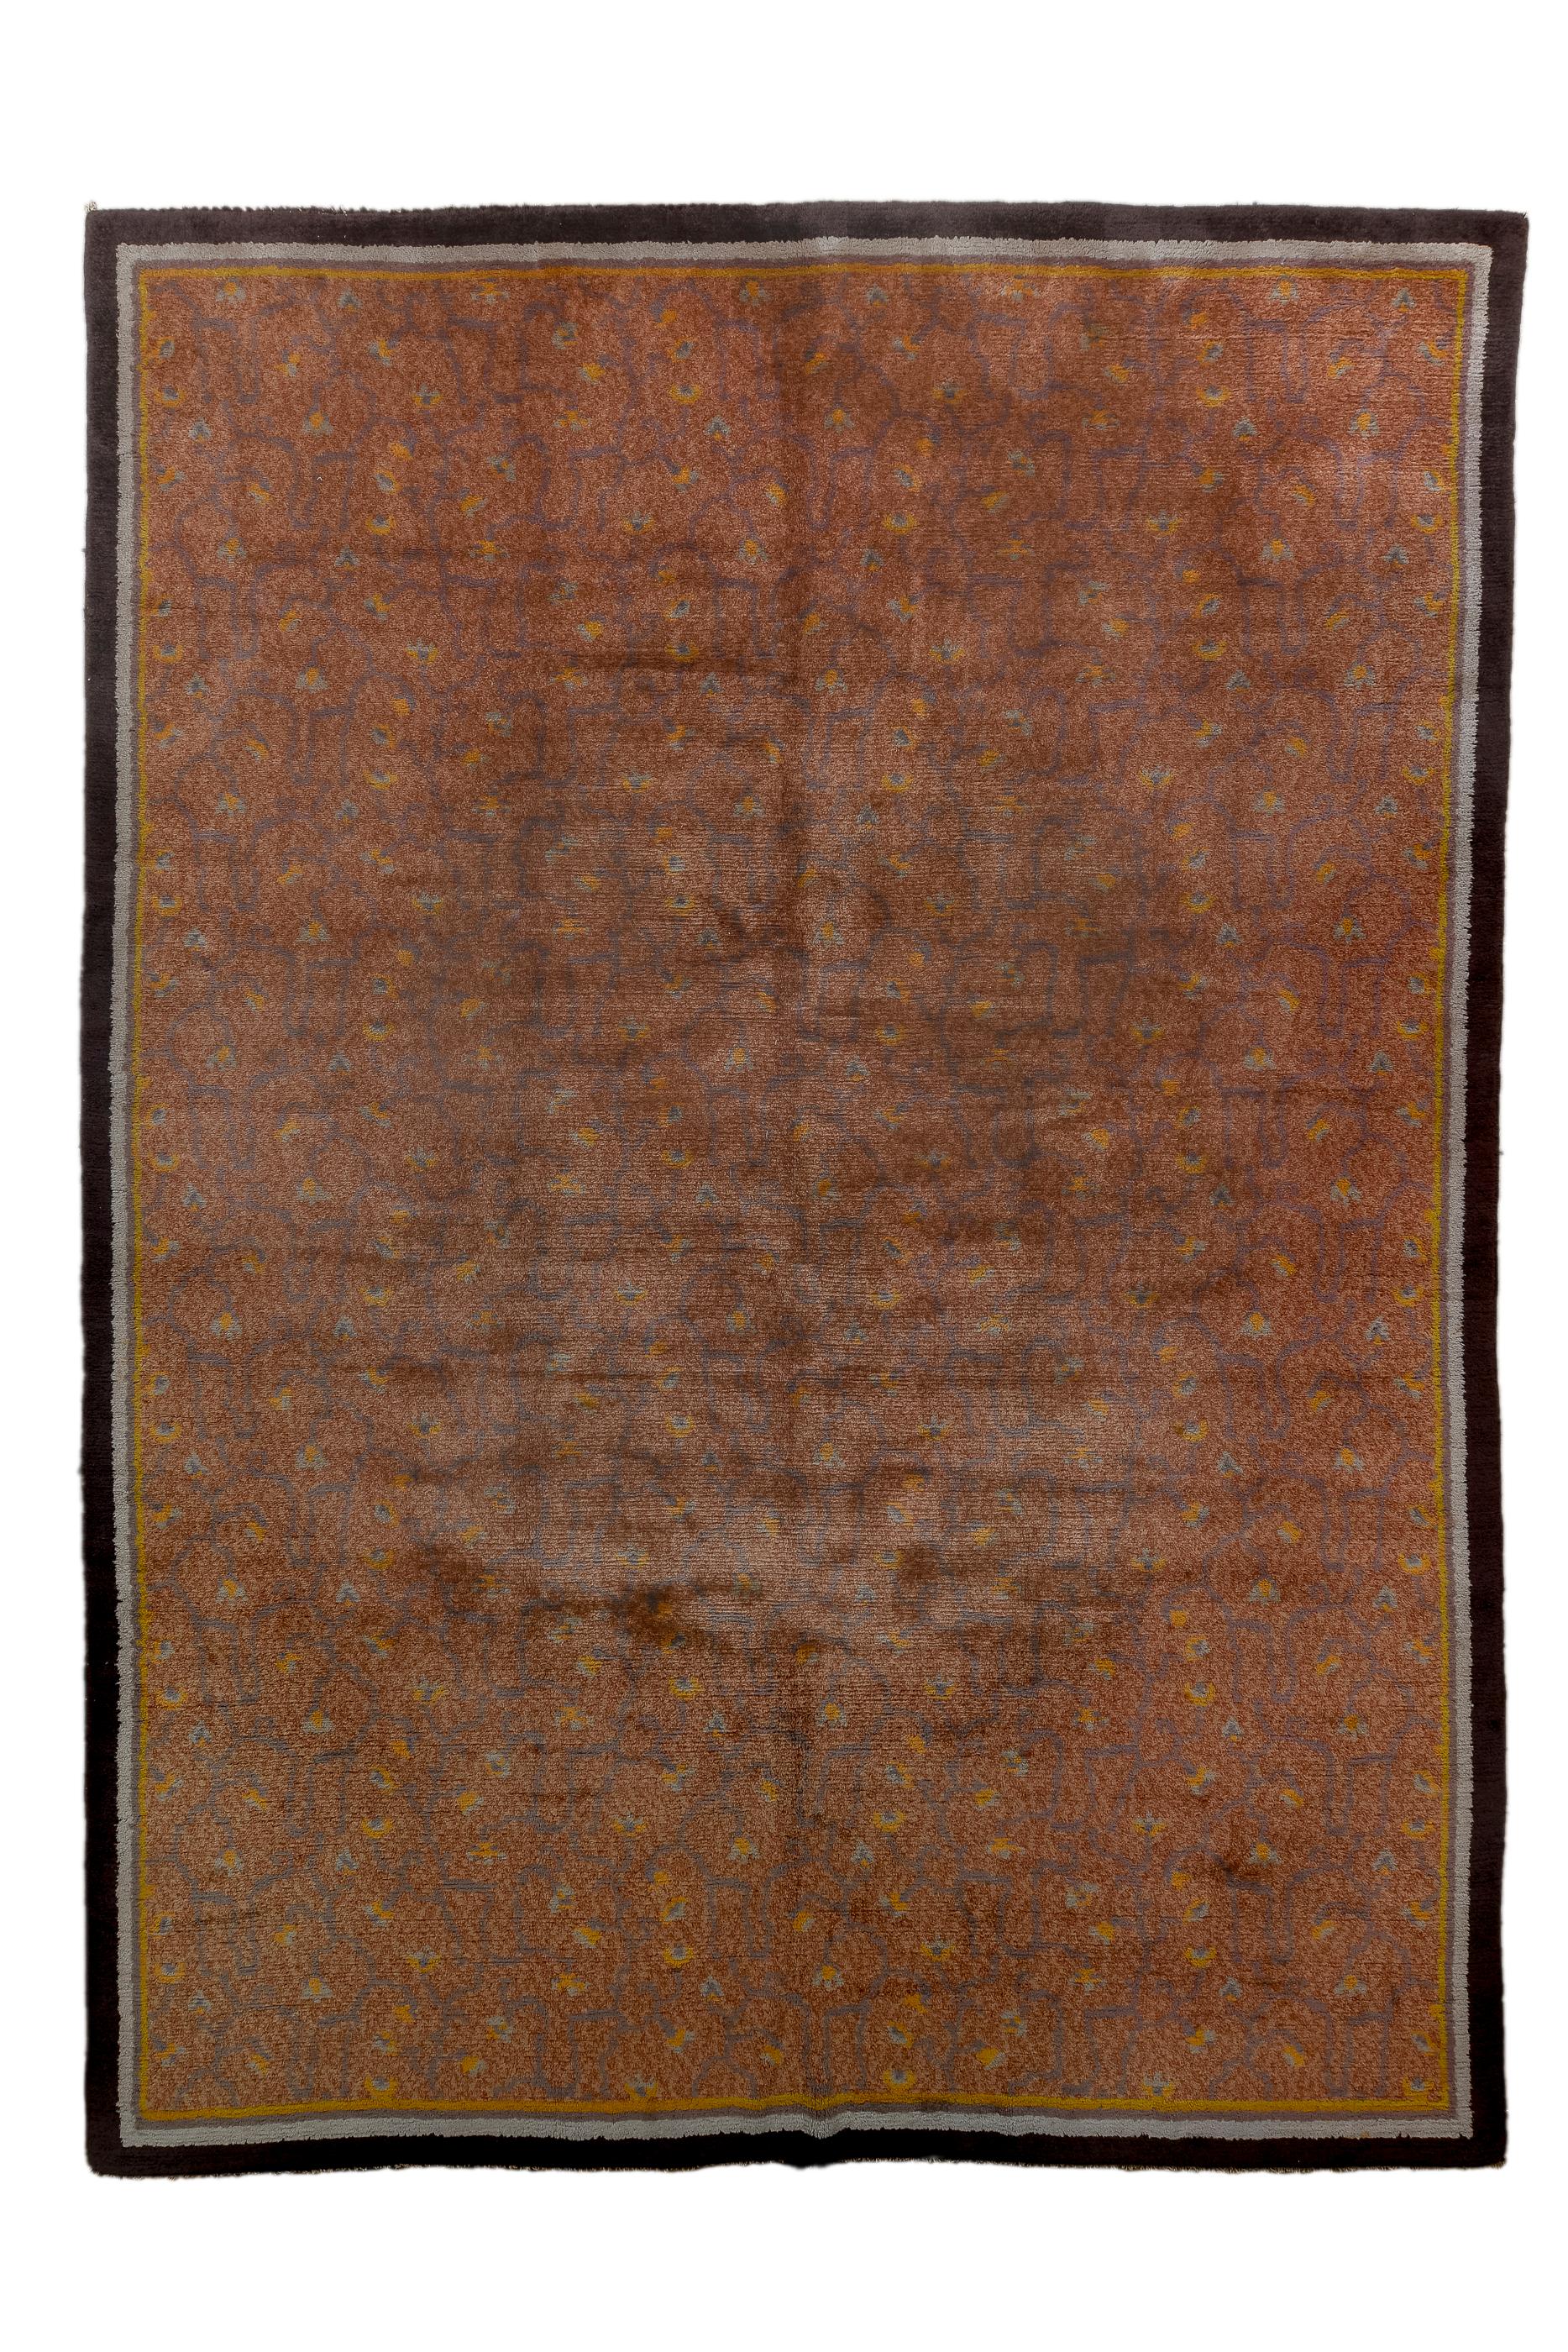 A very attractive minimal rug made in Sweden, quite rare to be found in the market. The background color develops in alternating textures on the colors of beige and light brown offering a very interesting visual impact. The colors are warm and well